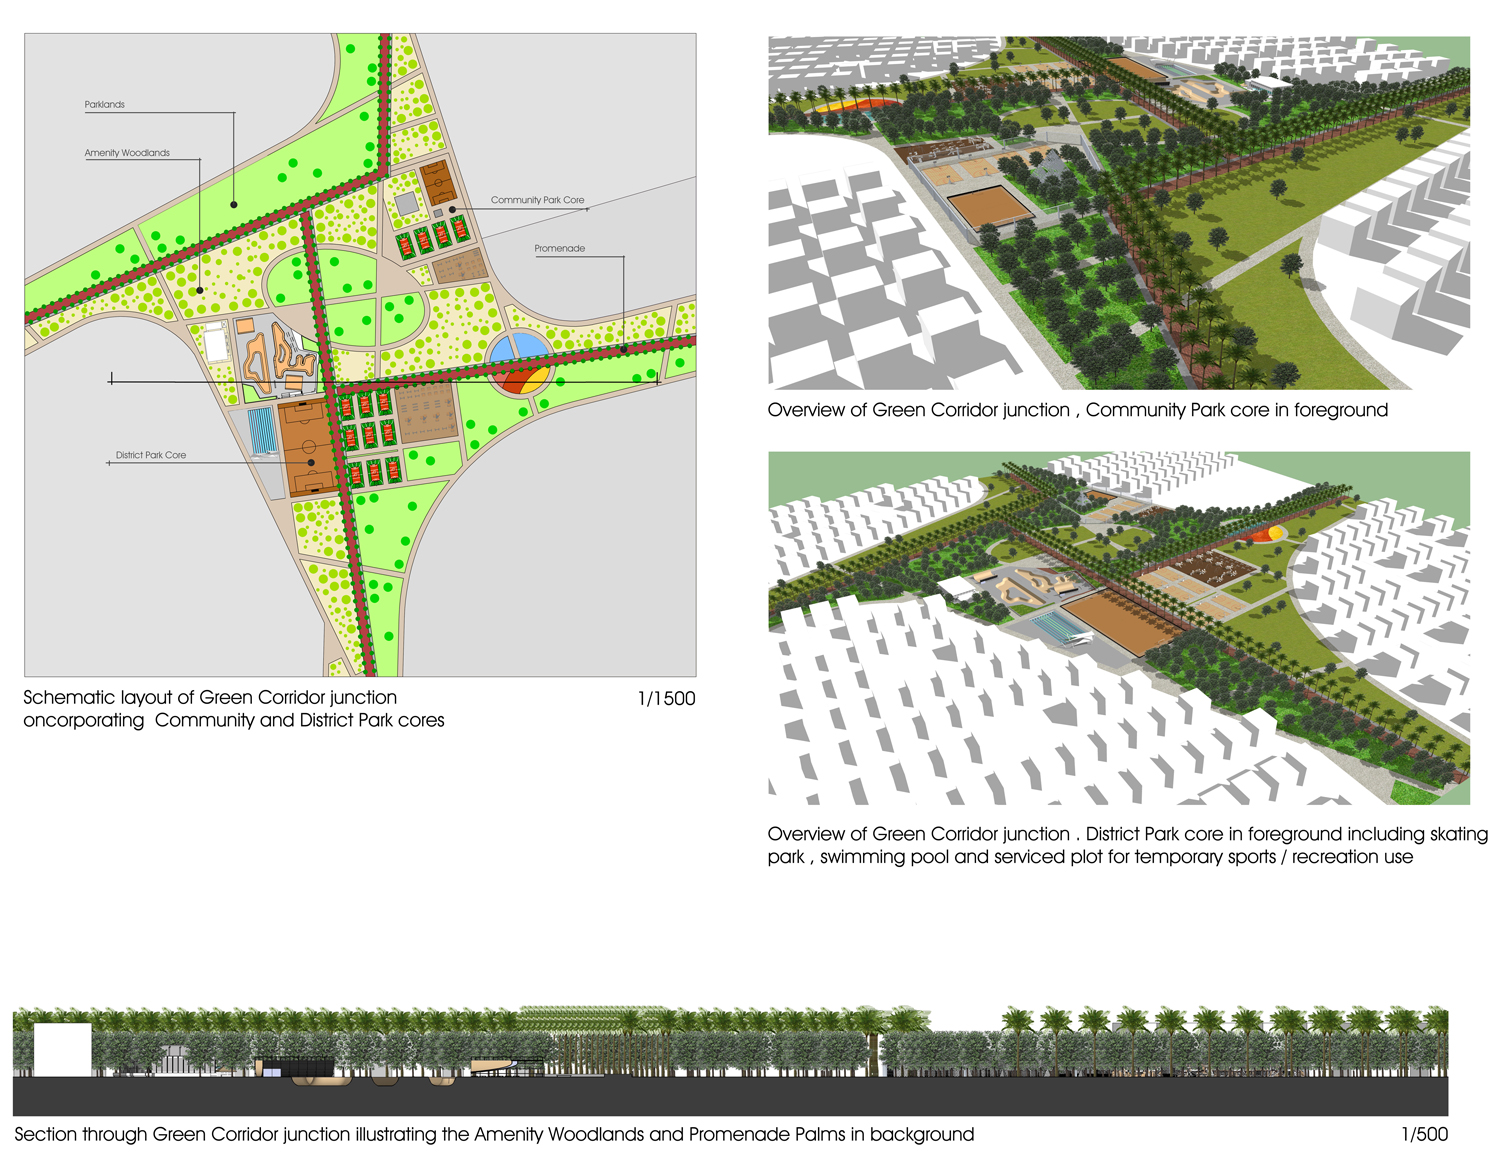 The landscape master plan proposes a Network of Green Corridors that ensure safe pedestrian and cyclist movement throughout the Madinat al Nakheel. Schematic plan and views of Green Corridor junction used to locate Community and District Parks